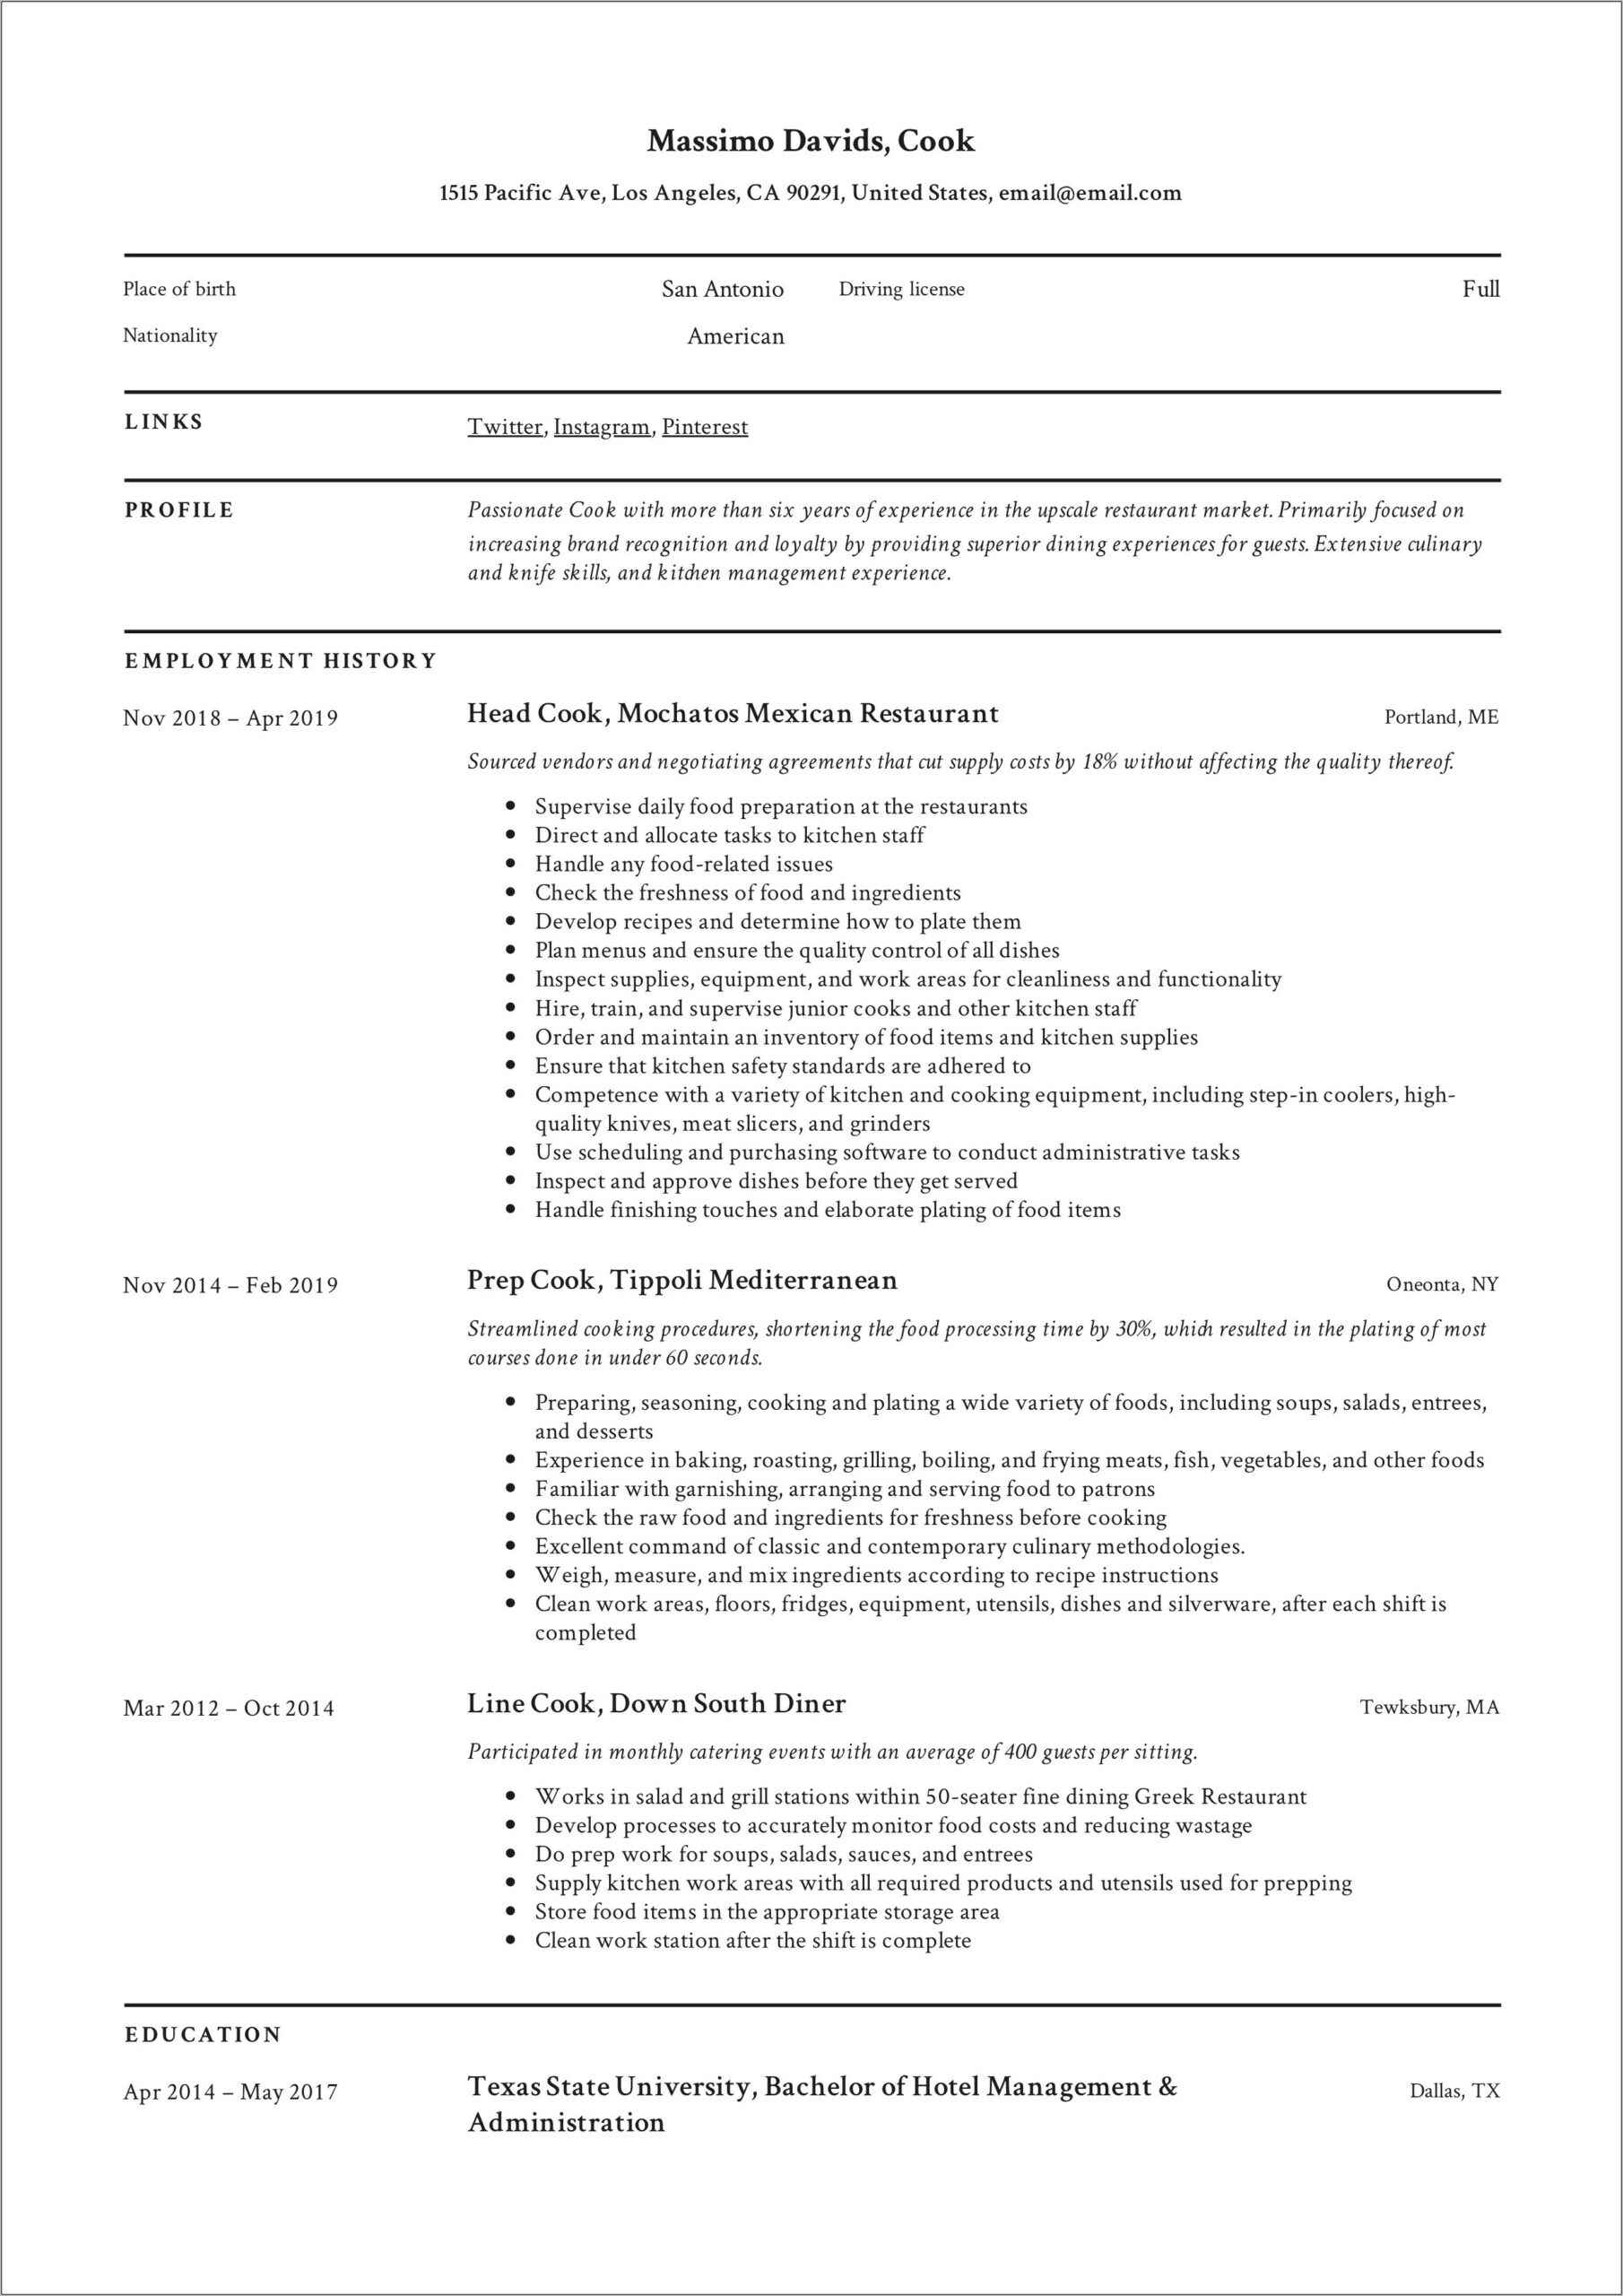 Resume Examples For Grill Cook